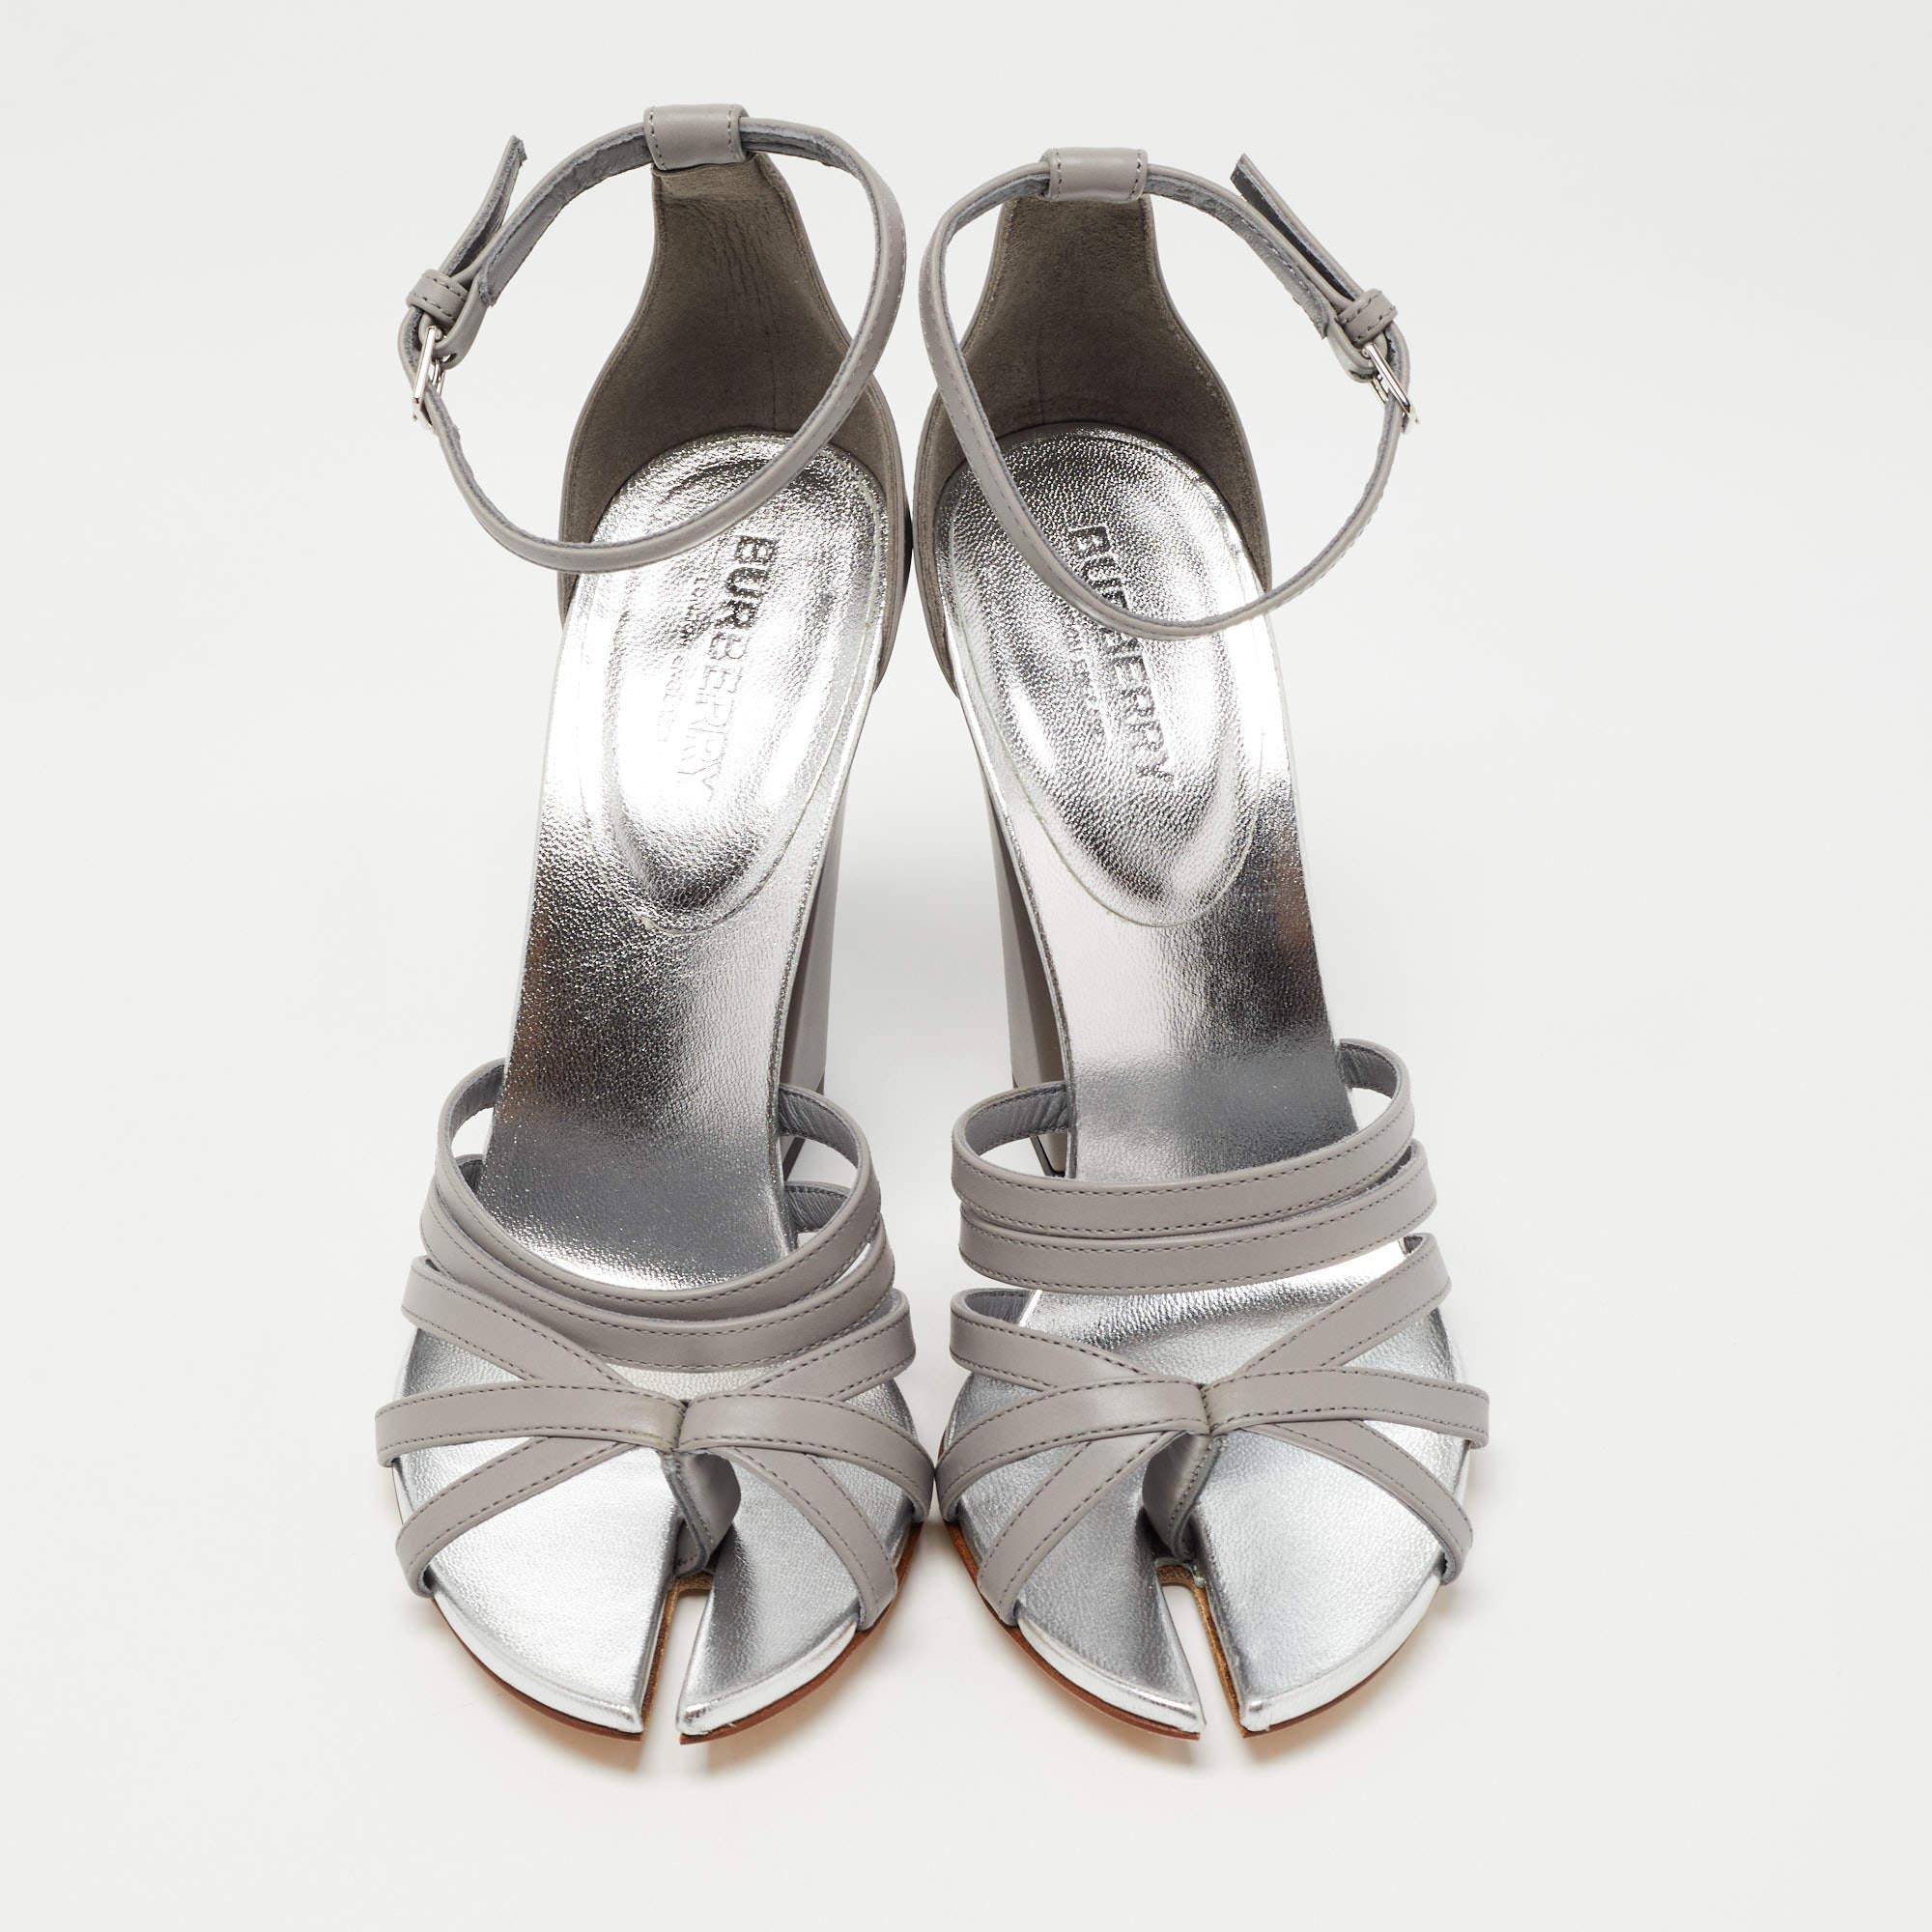 These sandals from Burberry are edgy and sleek at the same time. They have been crafted from leather and designed beautifully with cutouts on the toes, leather lining, strappy vamps, and block heels. They are made complete with buckled ankle strap